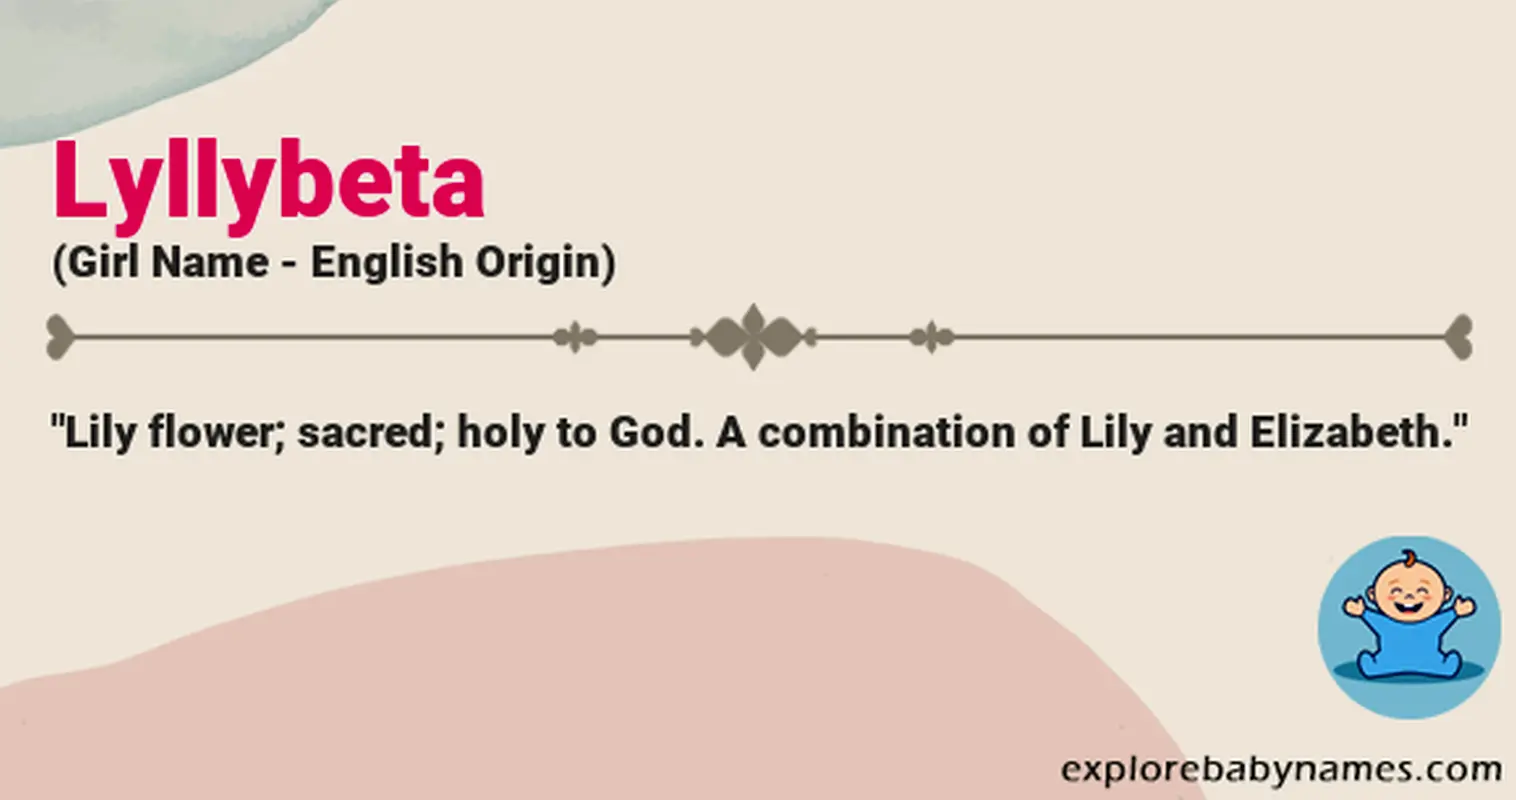 Meaning of Lyllybeta